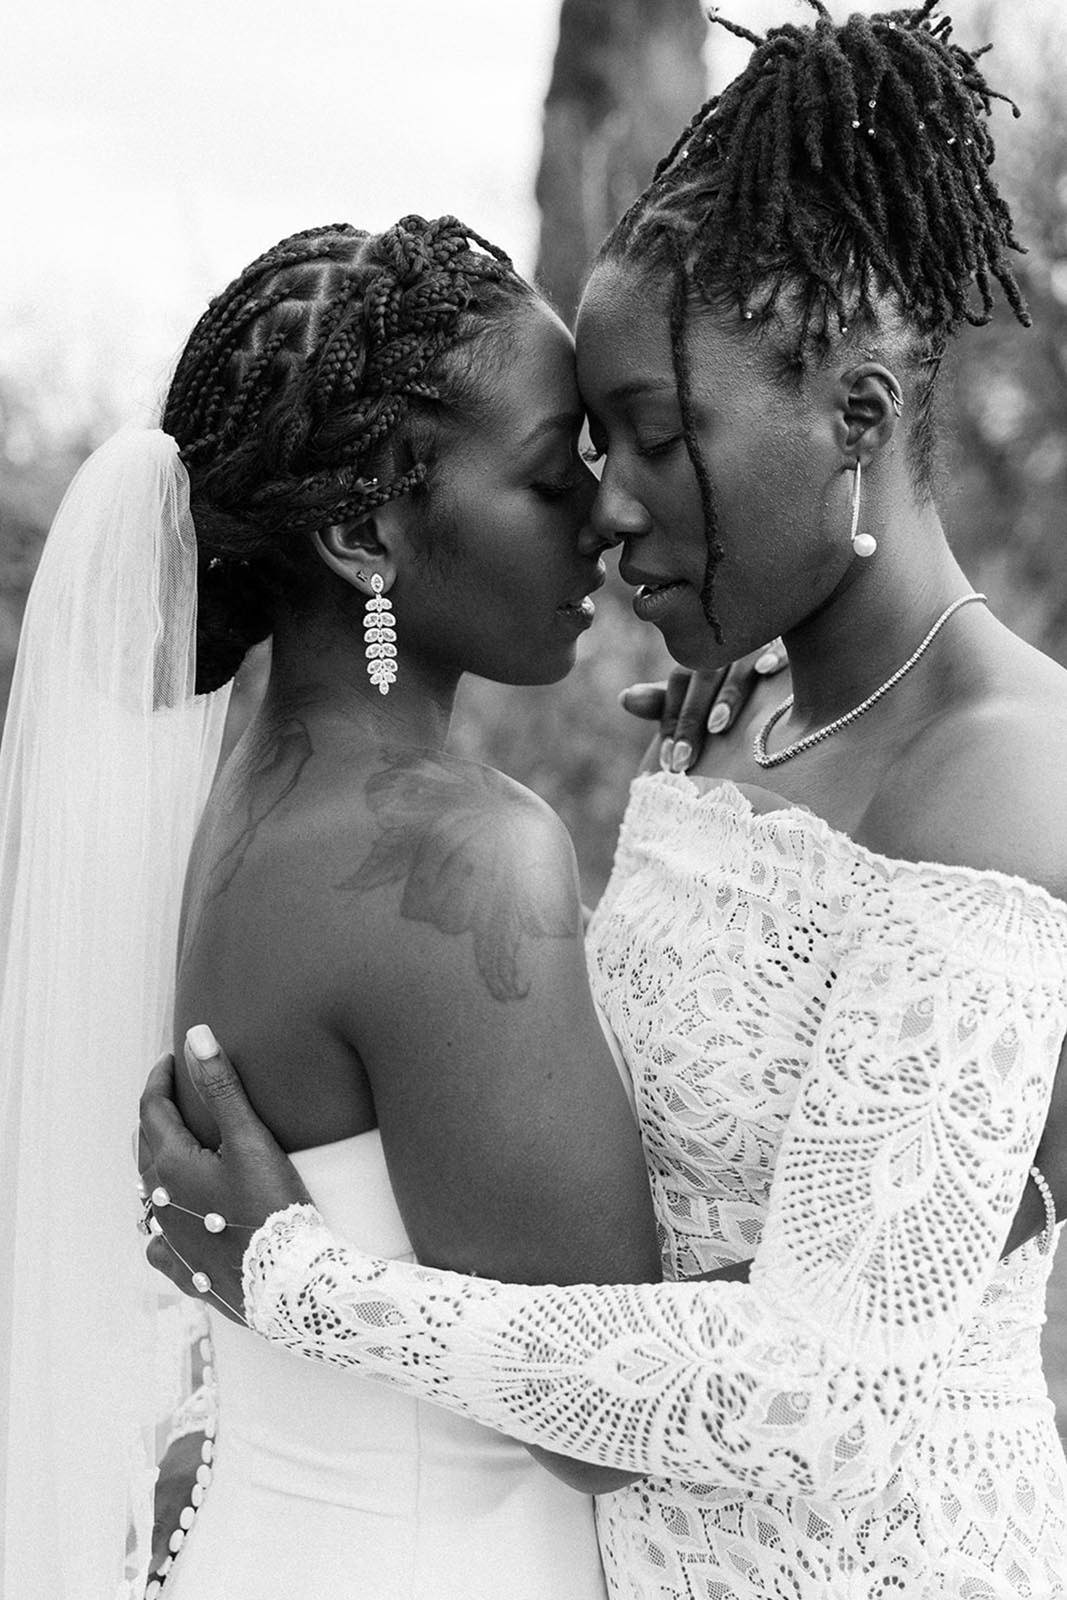 Two brides, holding each other